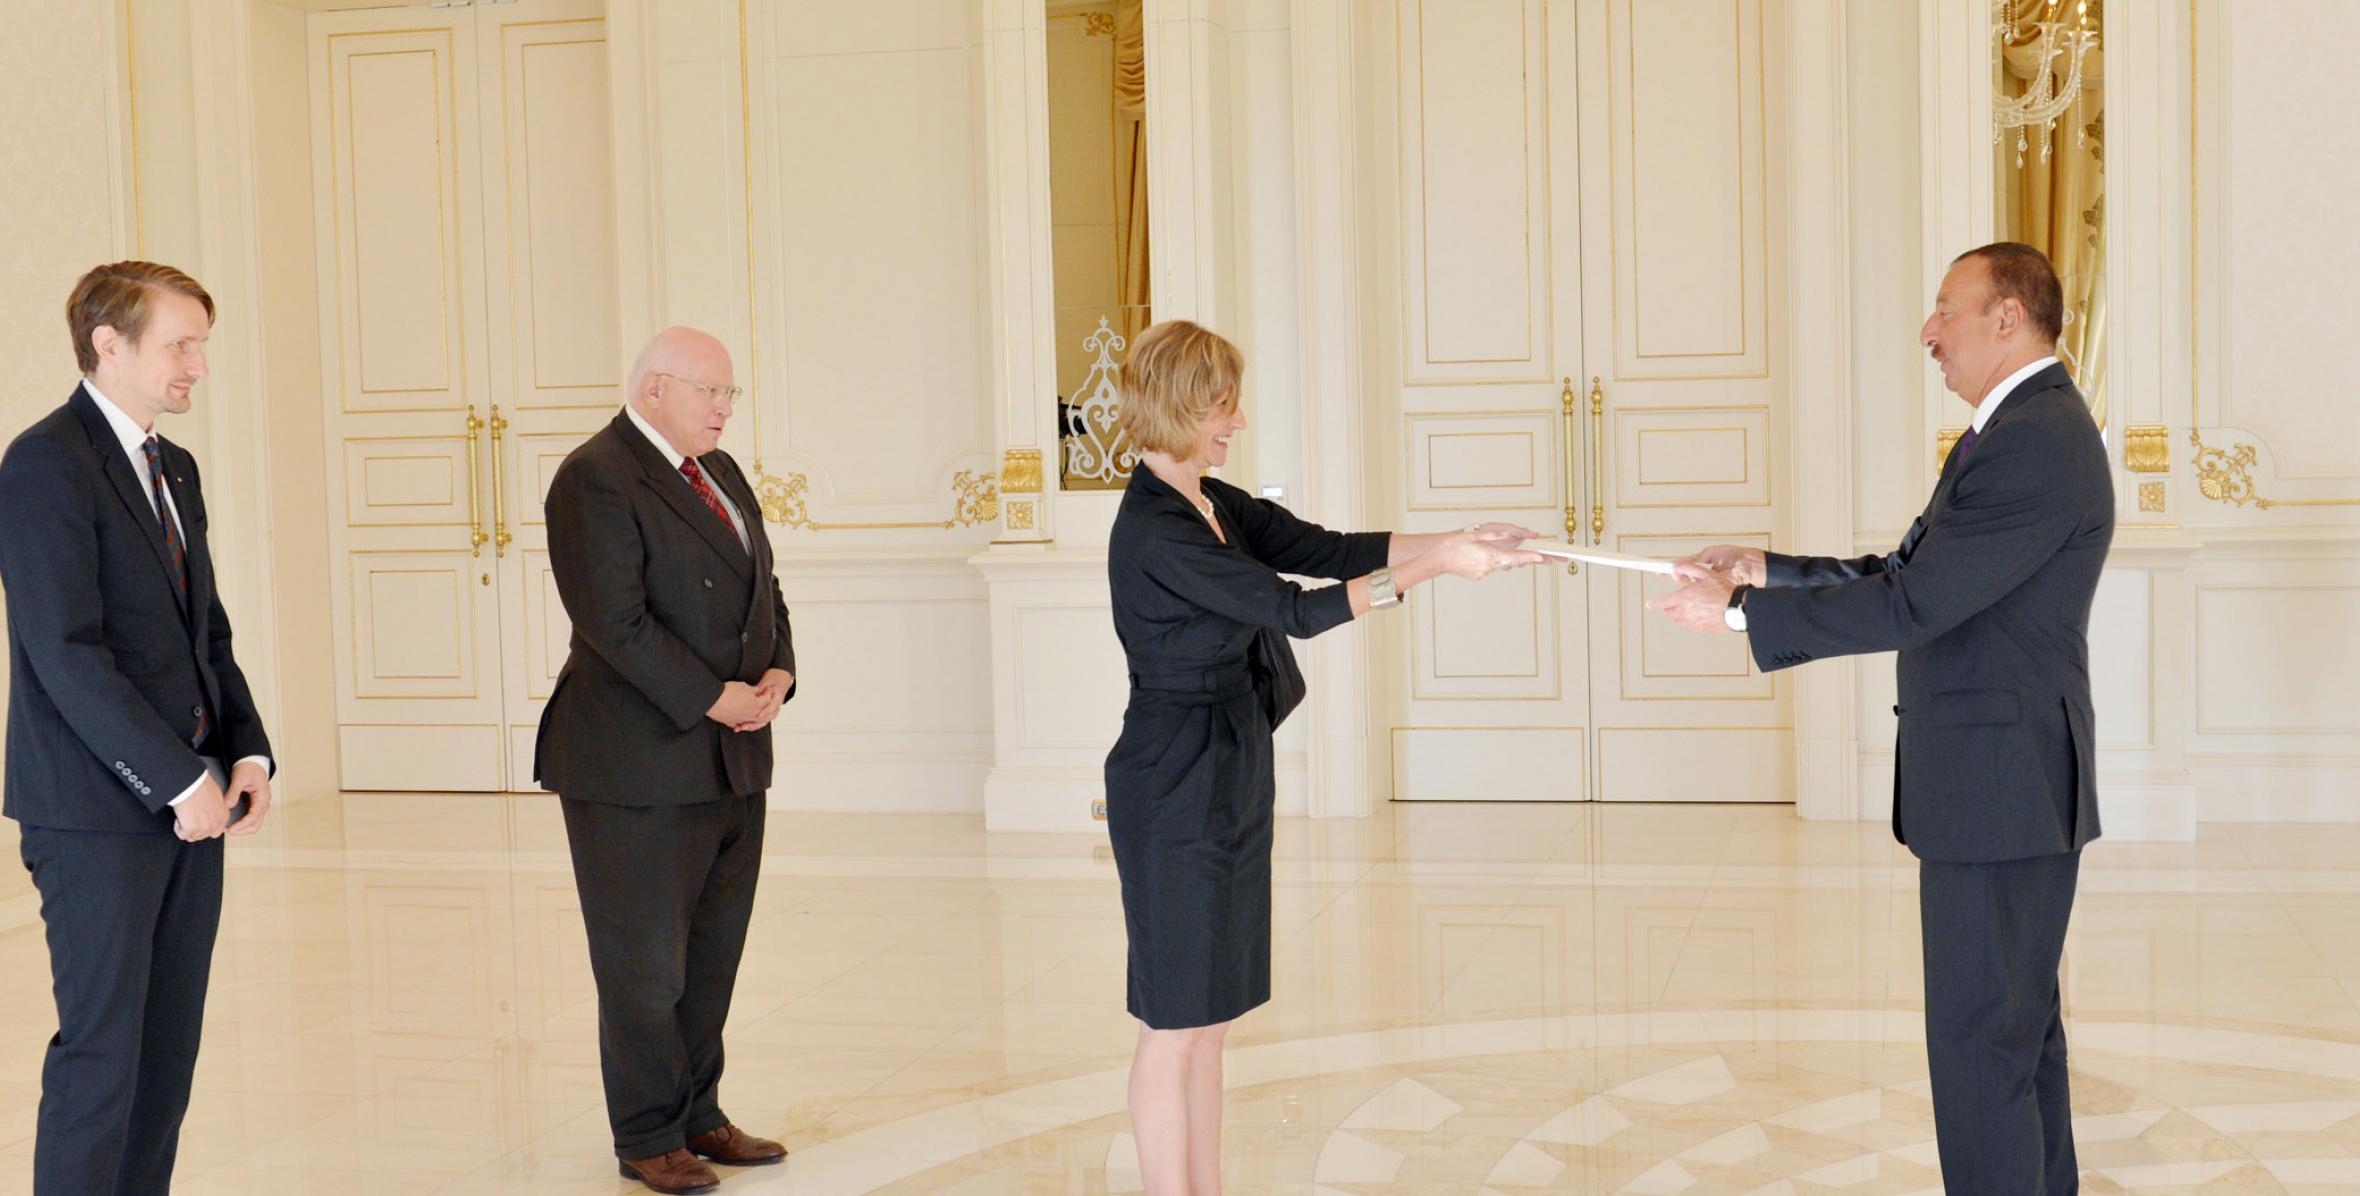 Ilham Aliyev received the credentials of a newly appointed Ambassador Extraordinary and Plenipotentiary of Germany to Azerbaijan